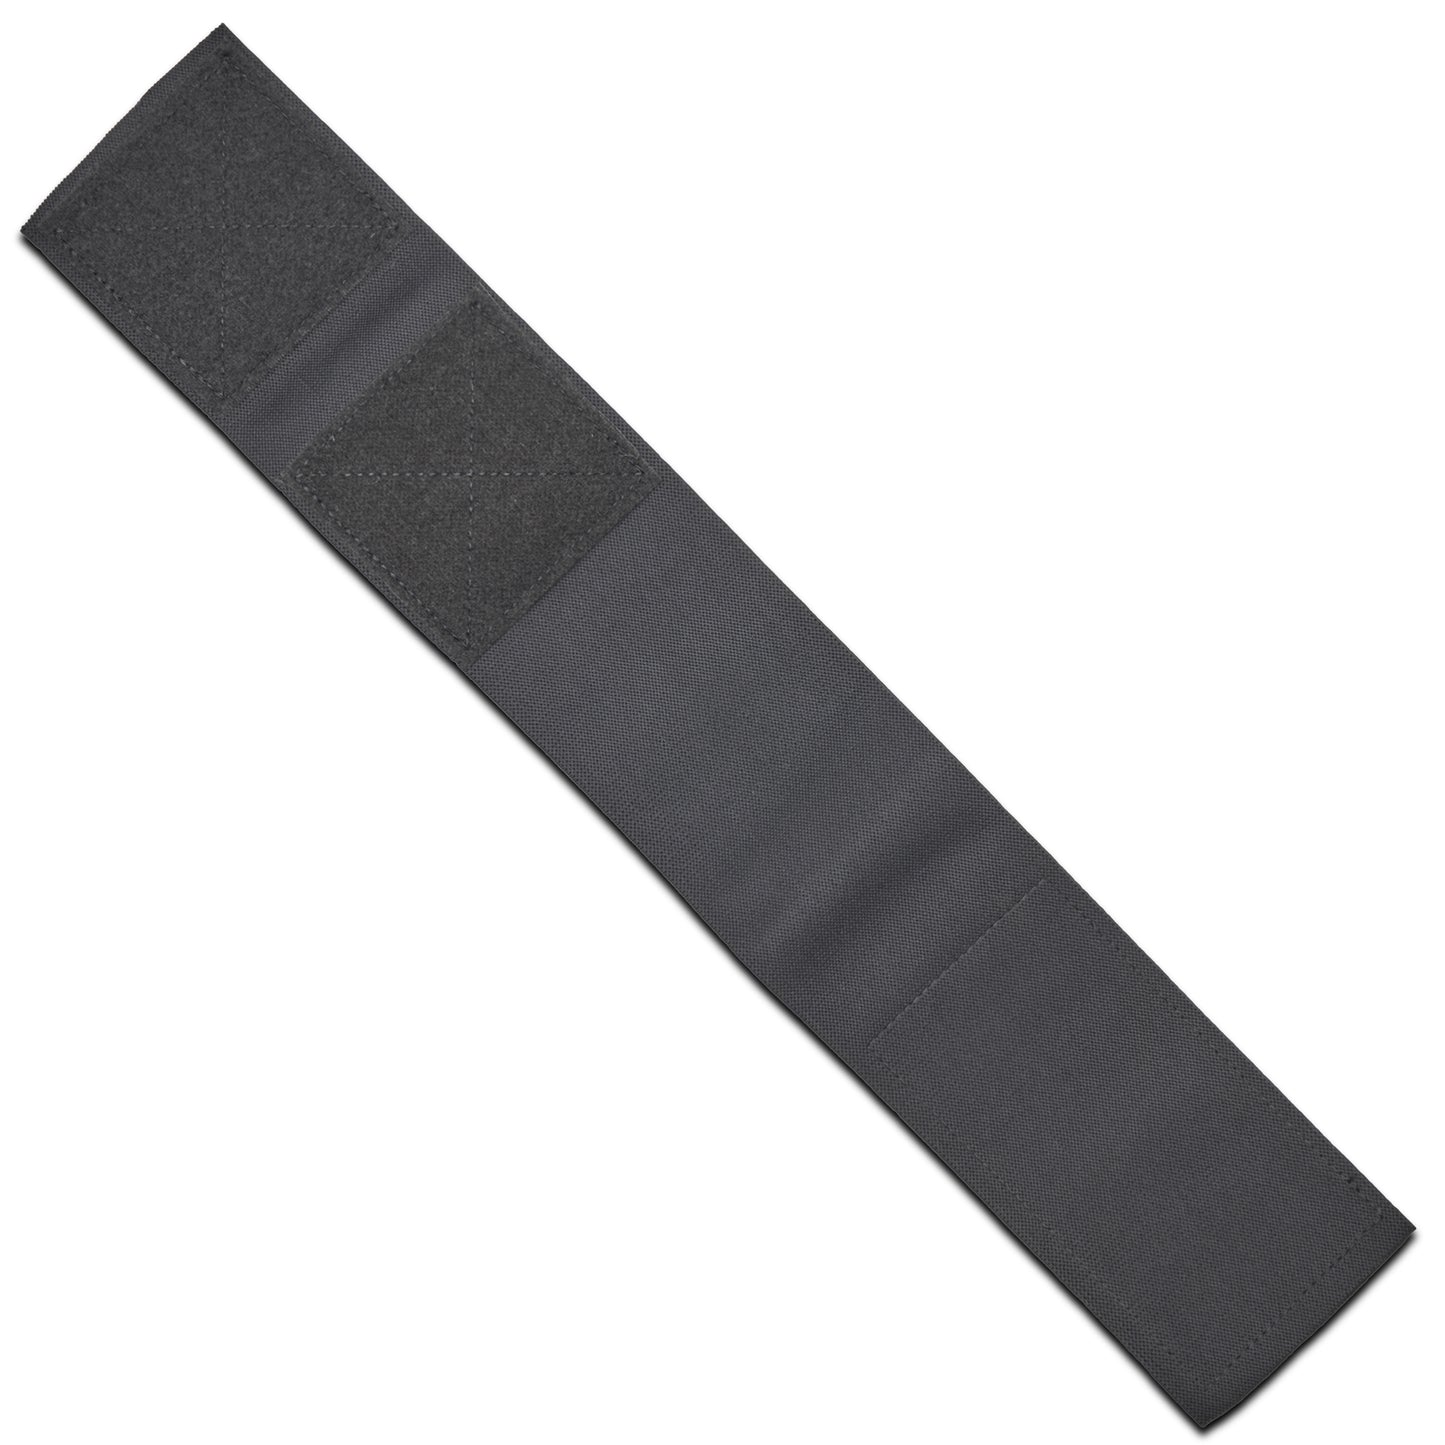 The VNSH grey waist belt extender 20 inches top view of inner side, and two Velcro’s on the left side